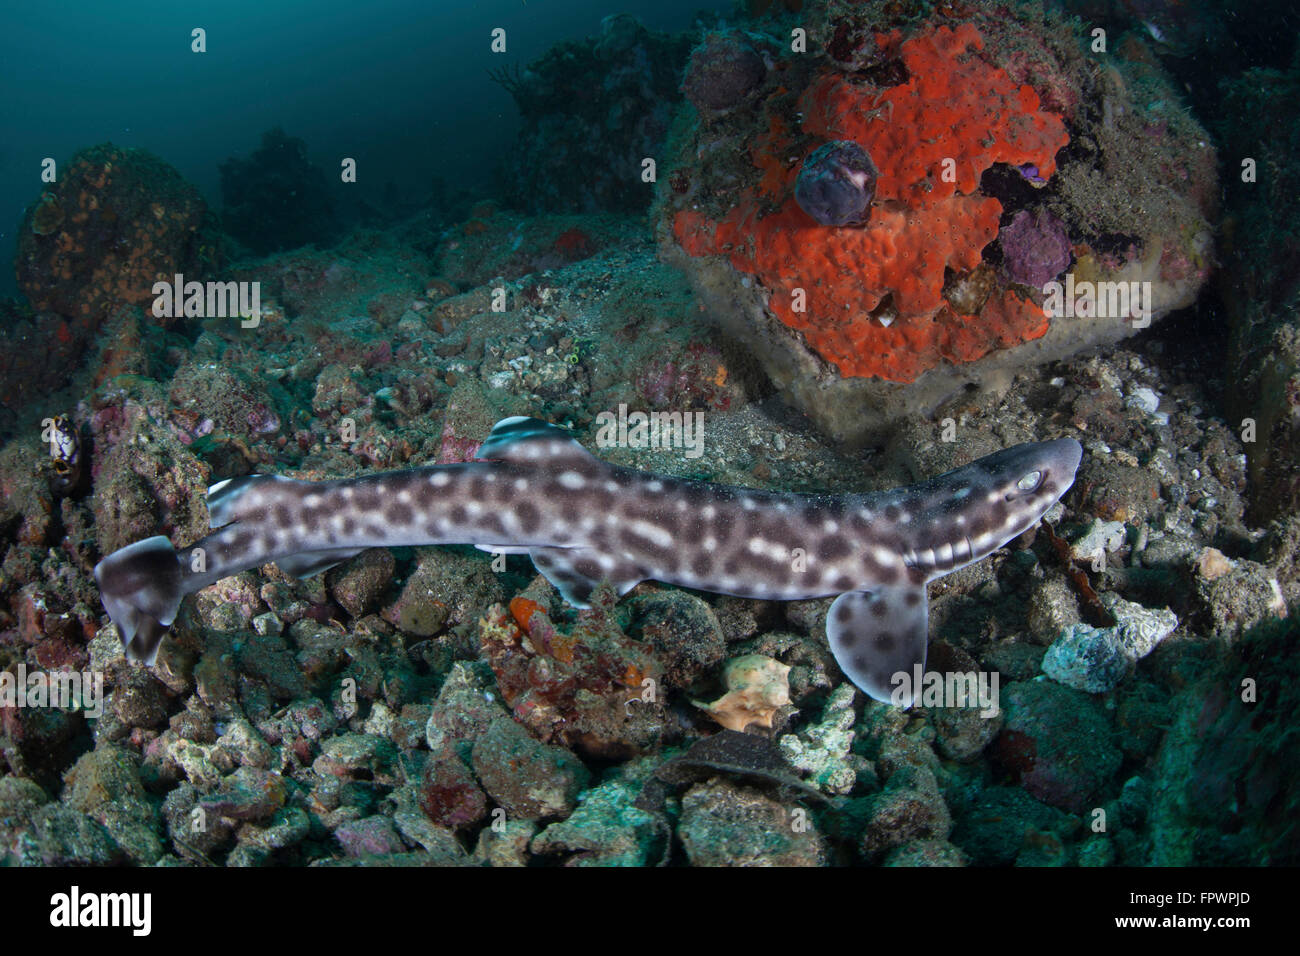 A coral catshark (Atelomycterus marmoratus) lays on the seafloor of Lembeh Strait, Indonesia. Lembeh Strait is known for its div Stock Photo